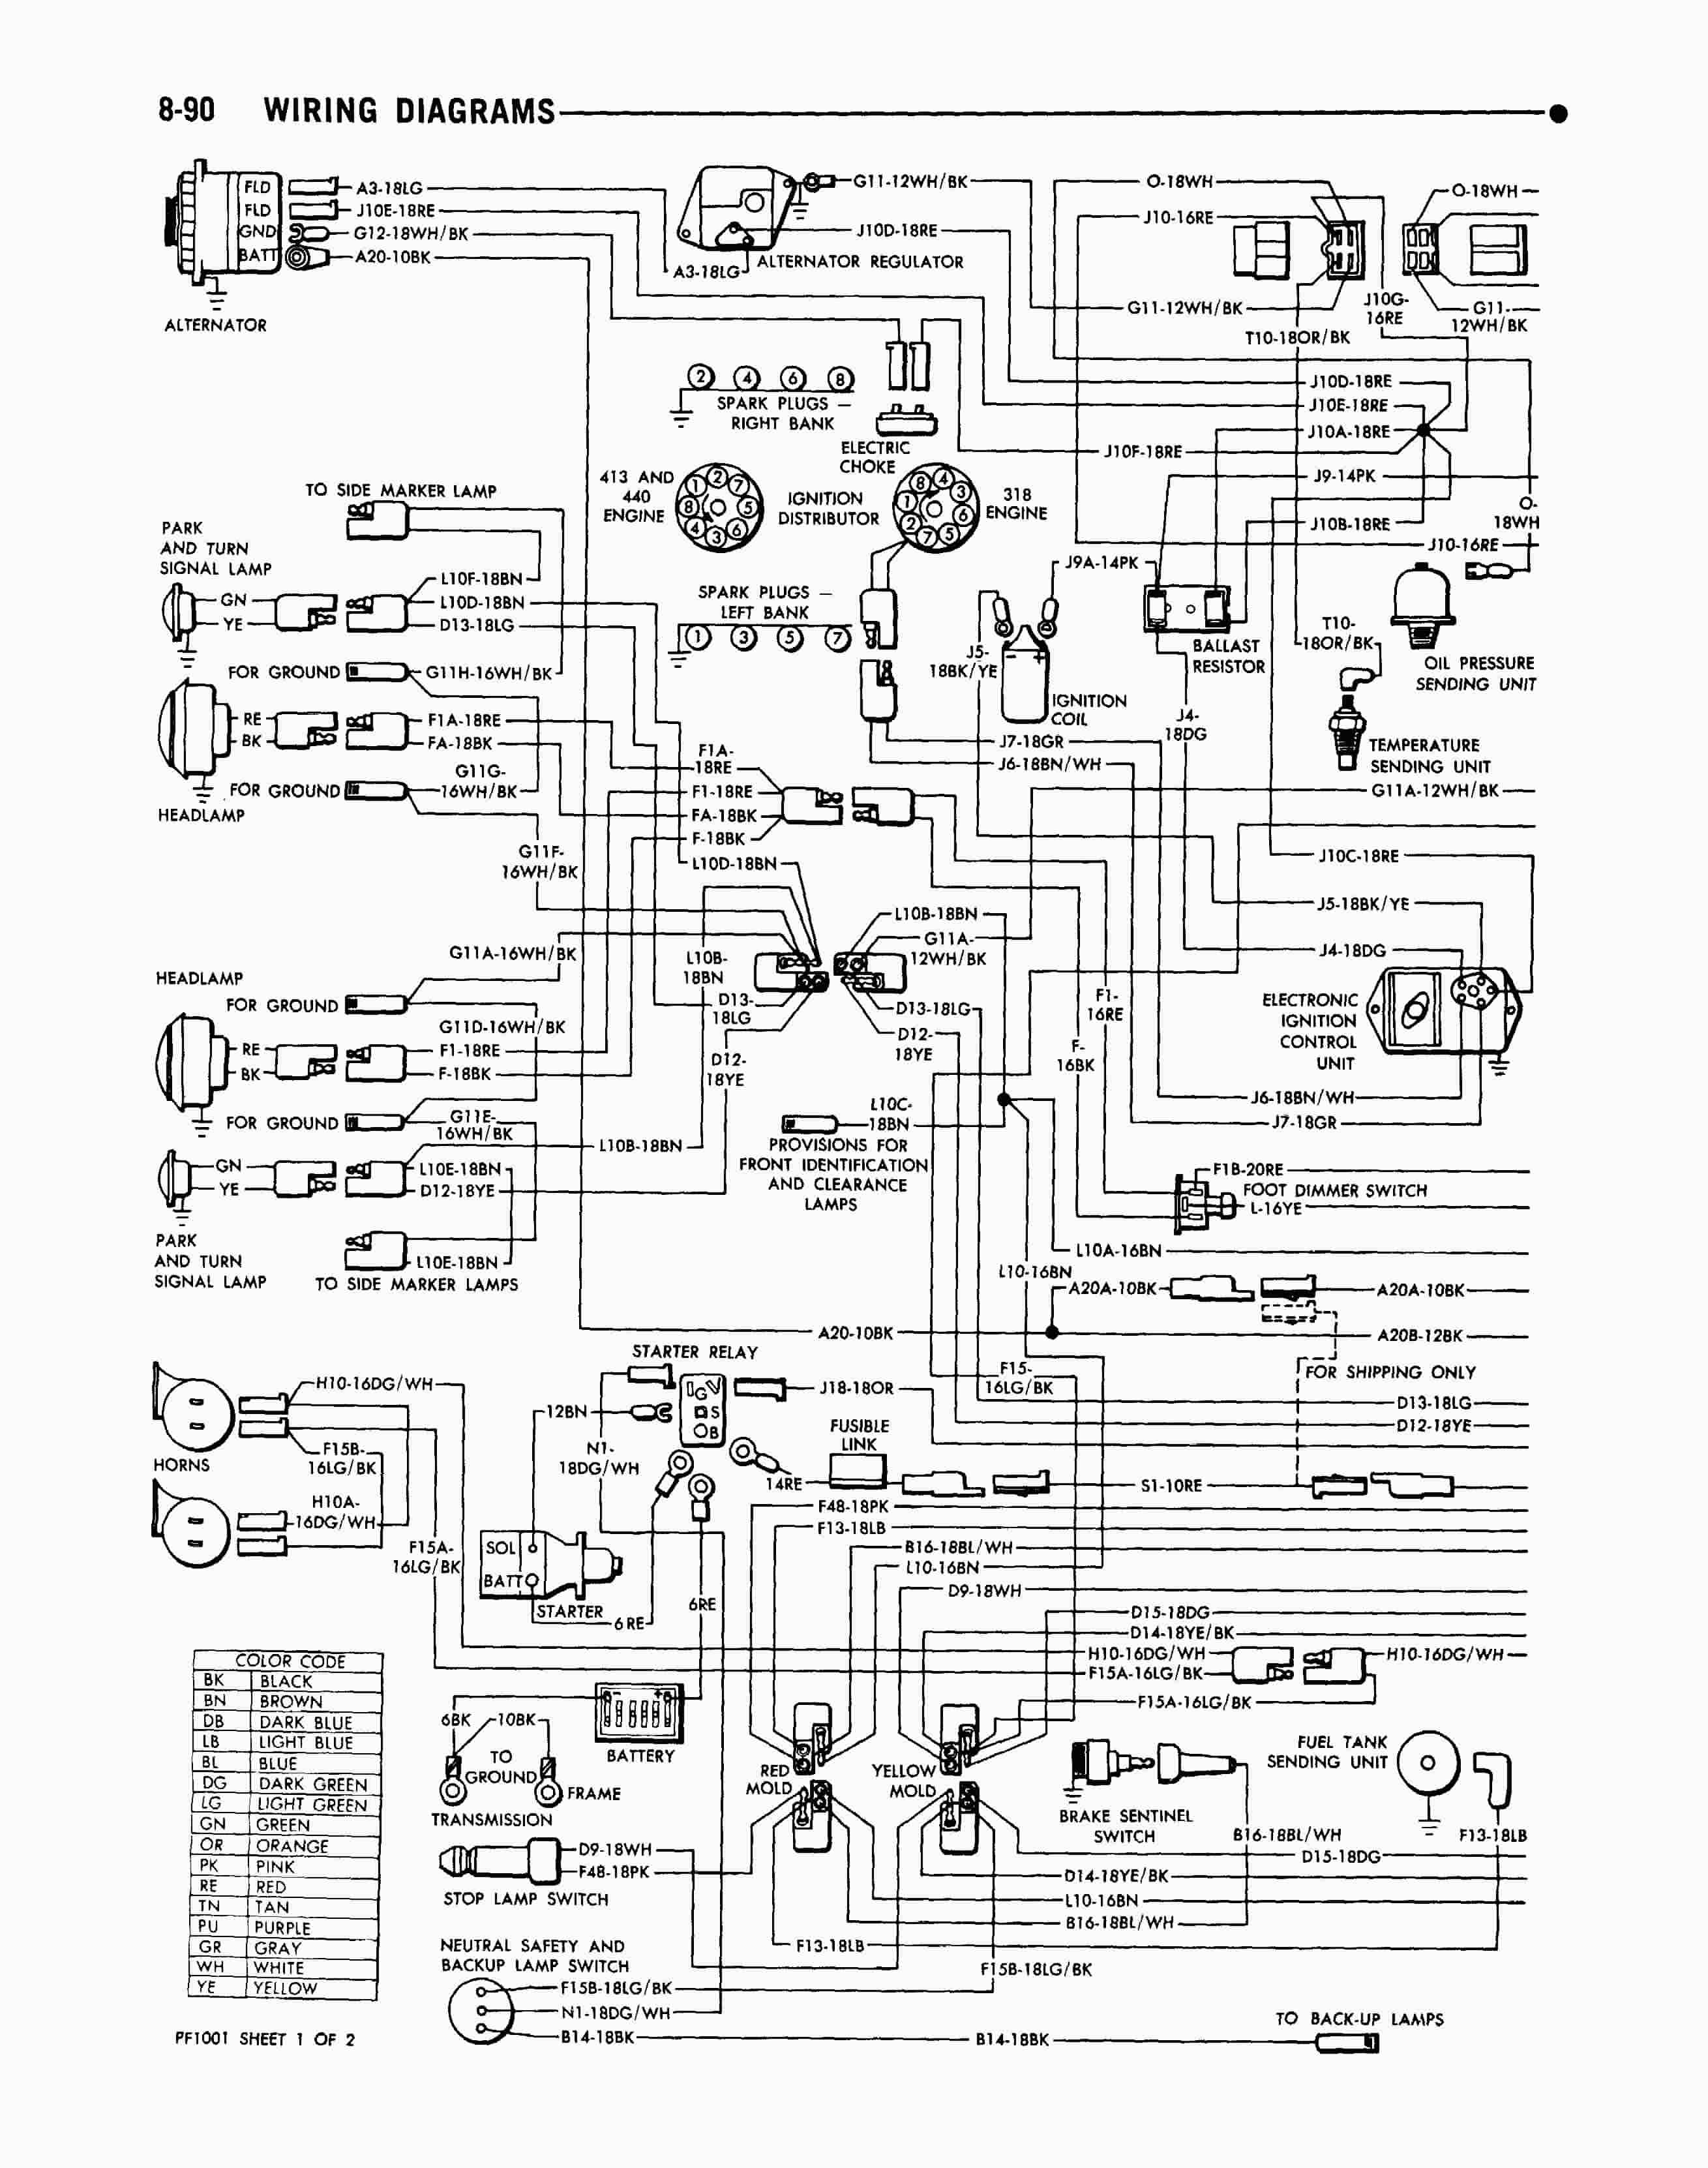 Dave's Place - 73 Dodge Class A Chassis Wiring Diagram Dodge Van Wiring Diagram Schematic Daves Place